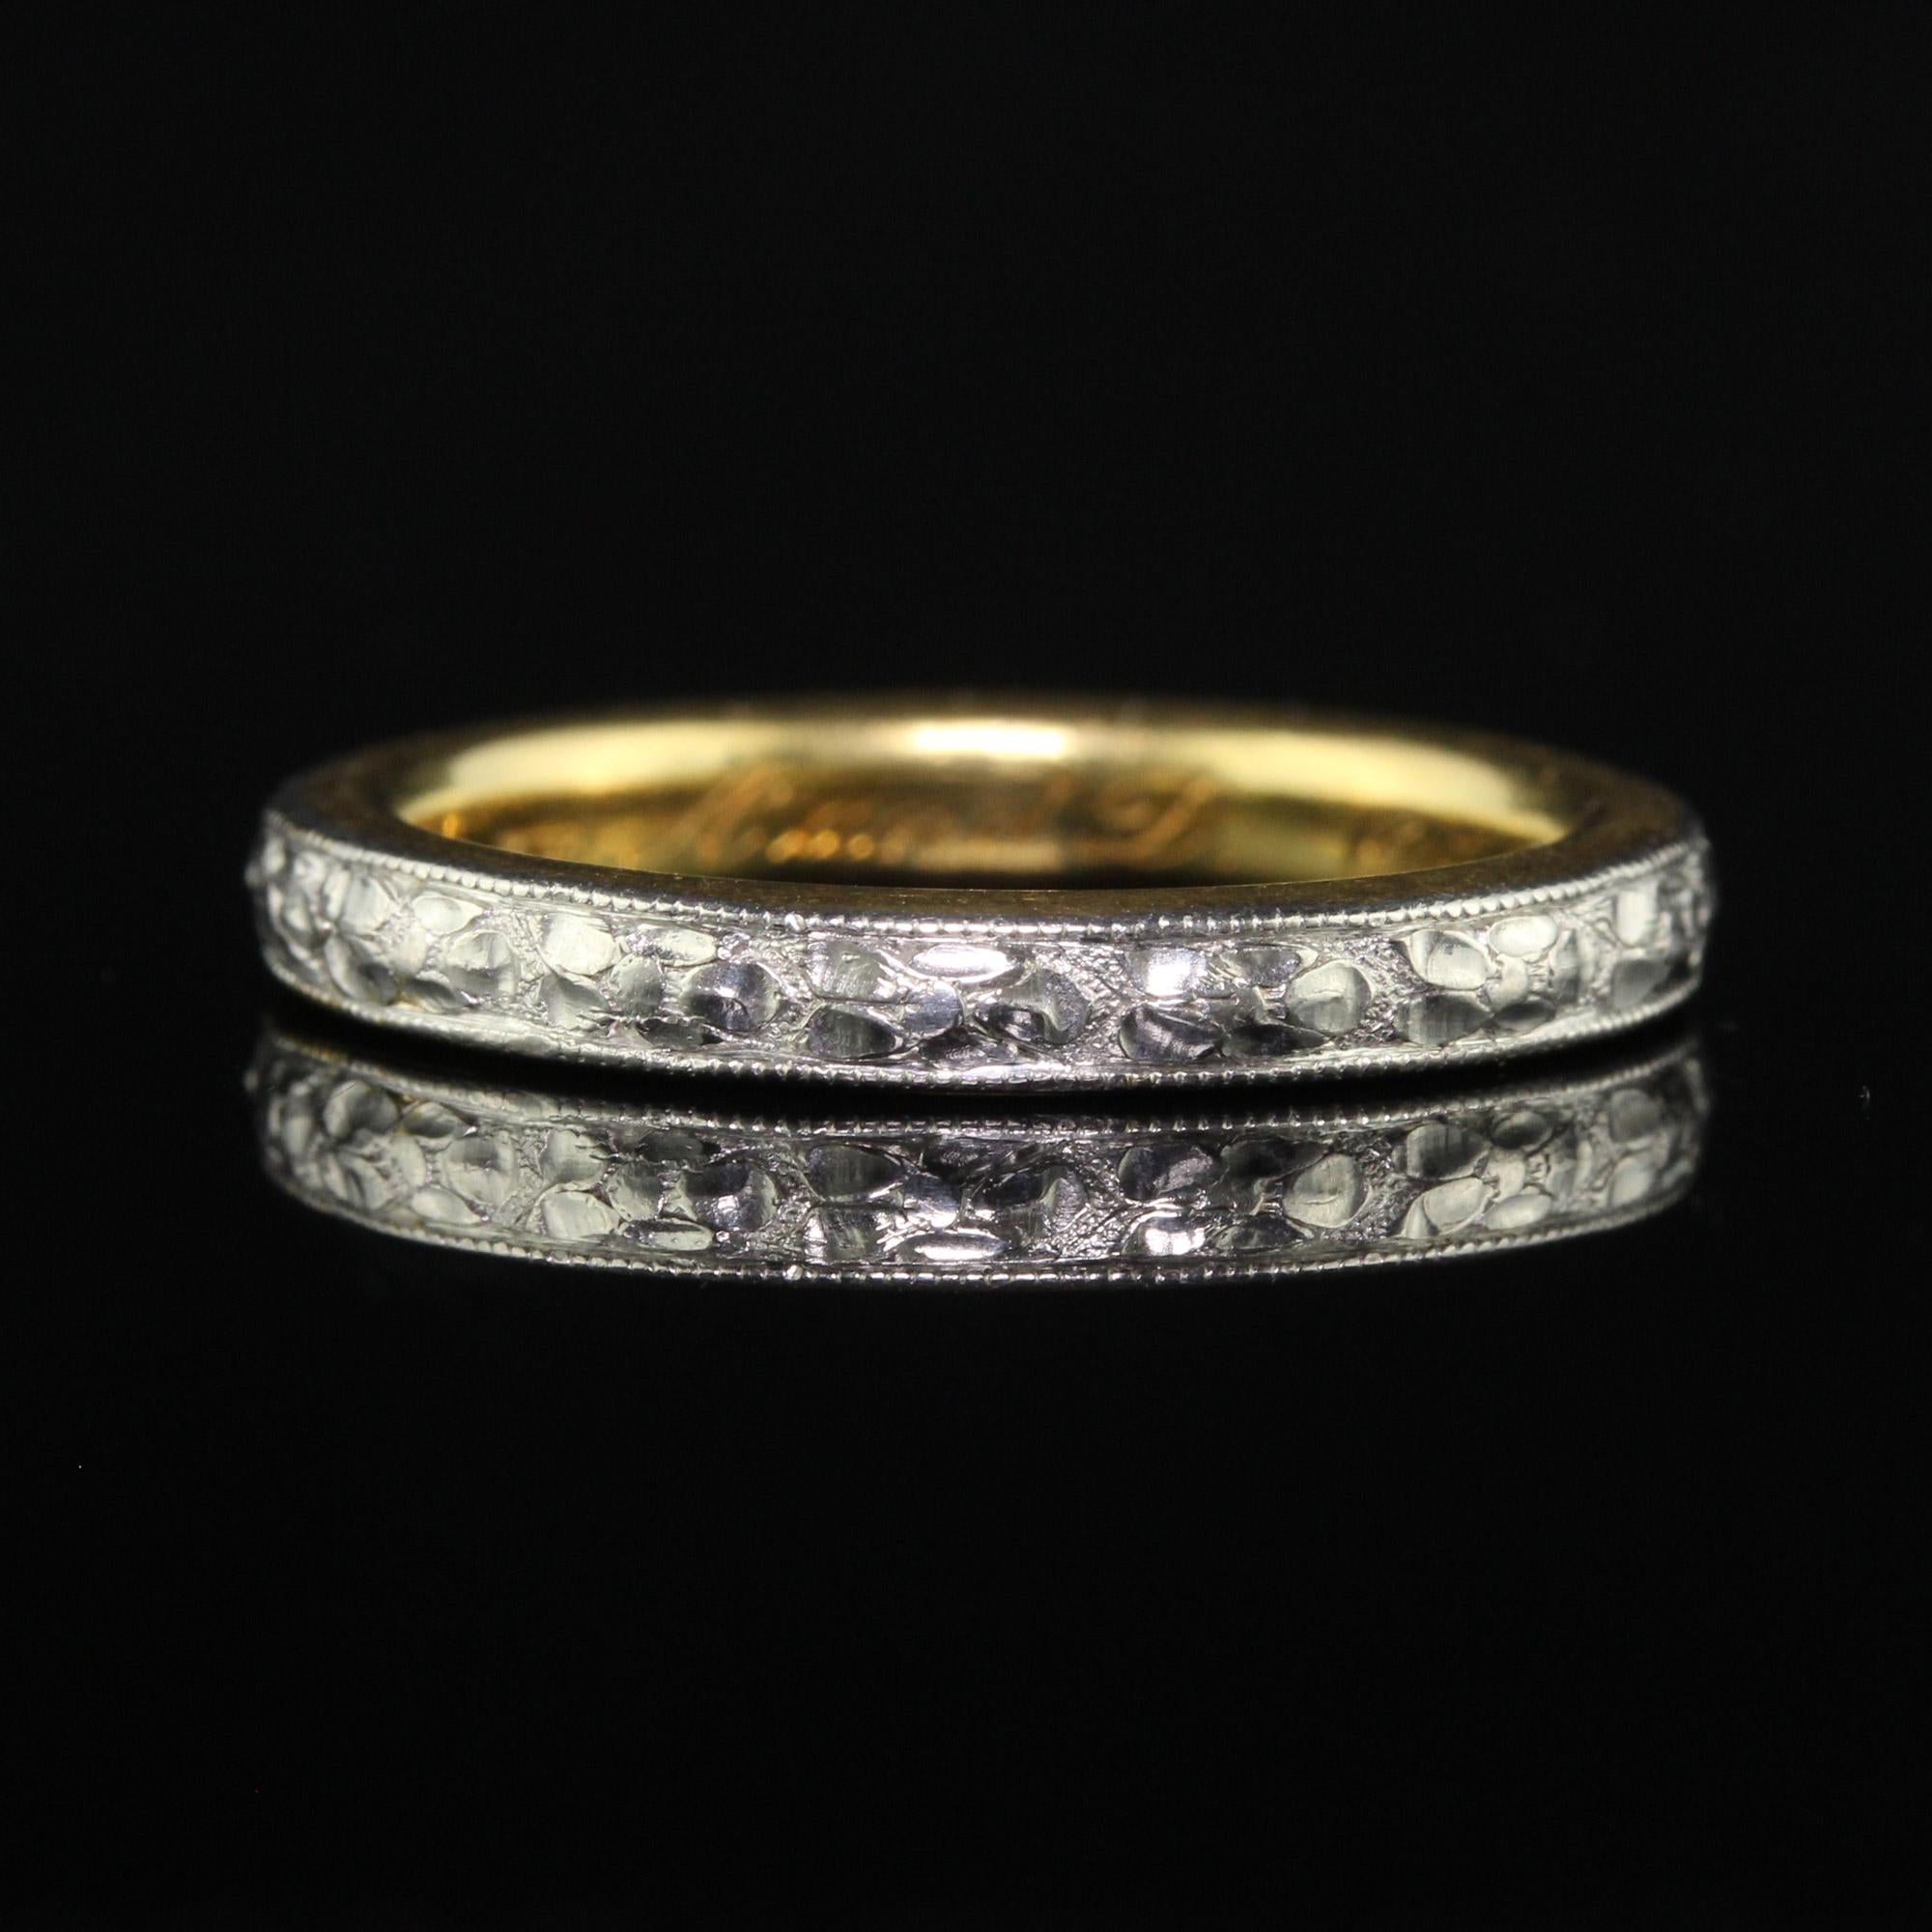 Antique Art Deco Platinum and 18K Gold Engraved Wedding Band Circa 1917 - Size 5 For Sale 2